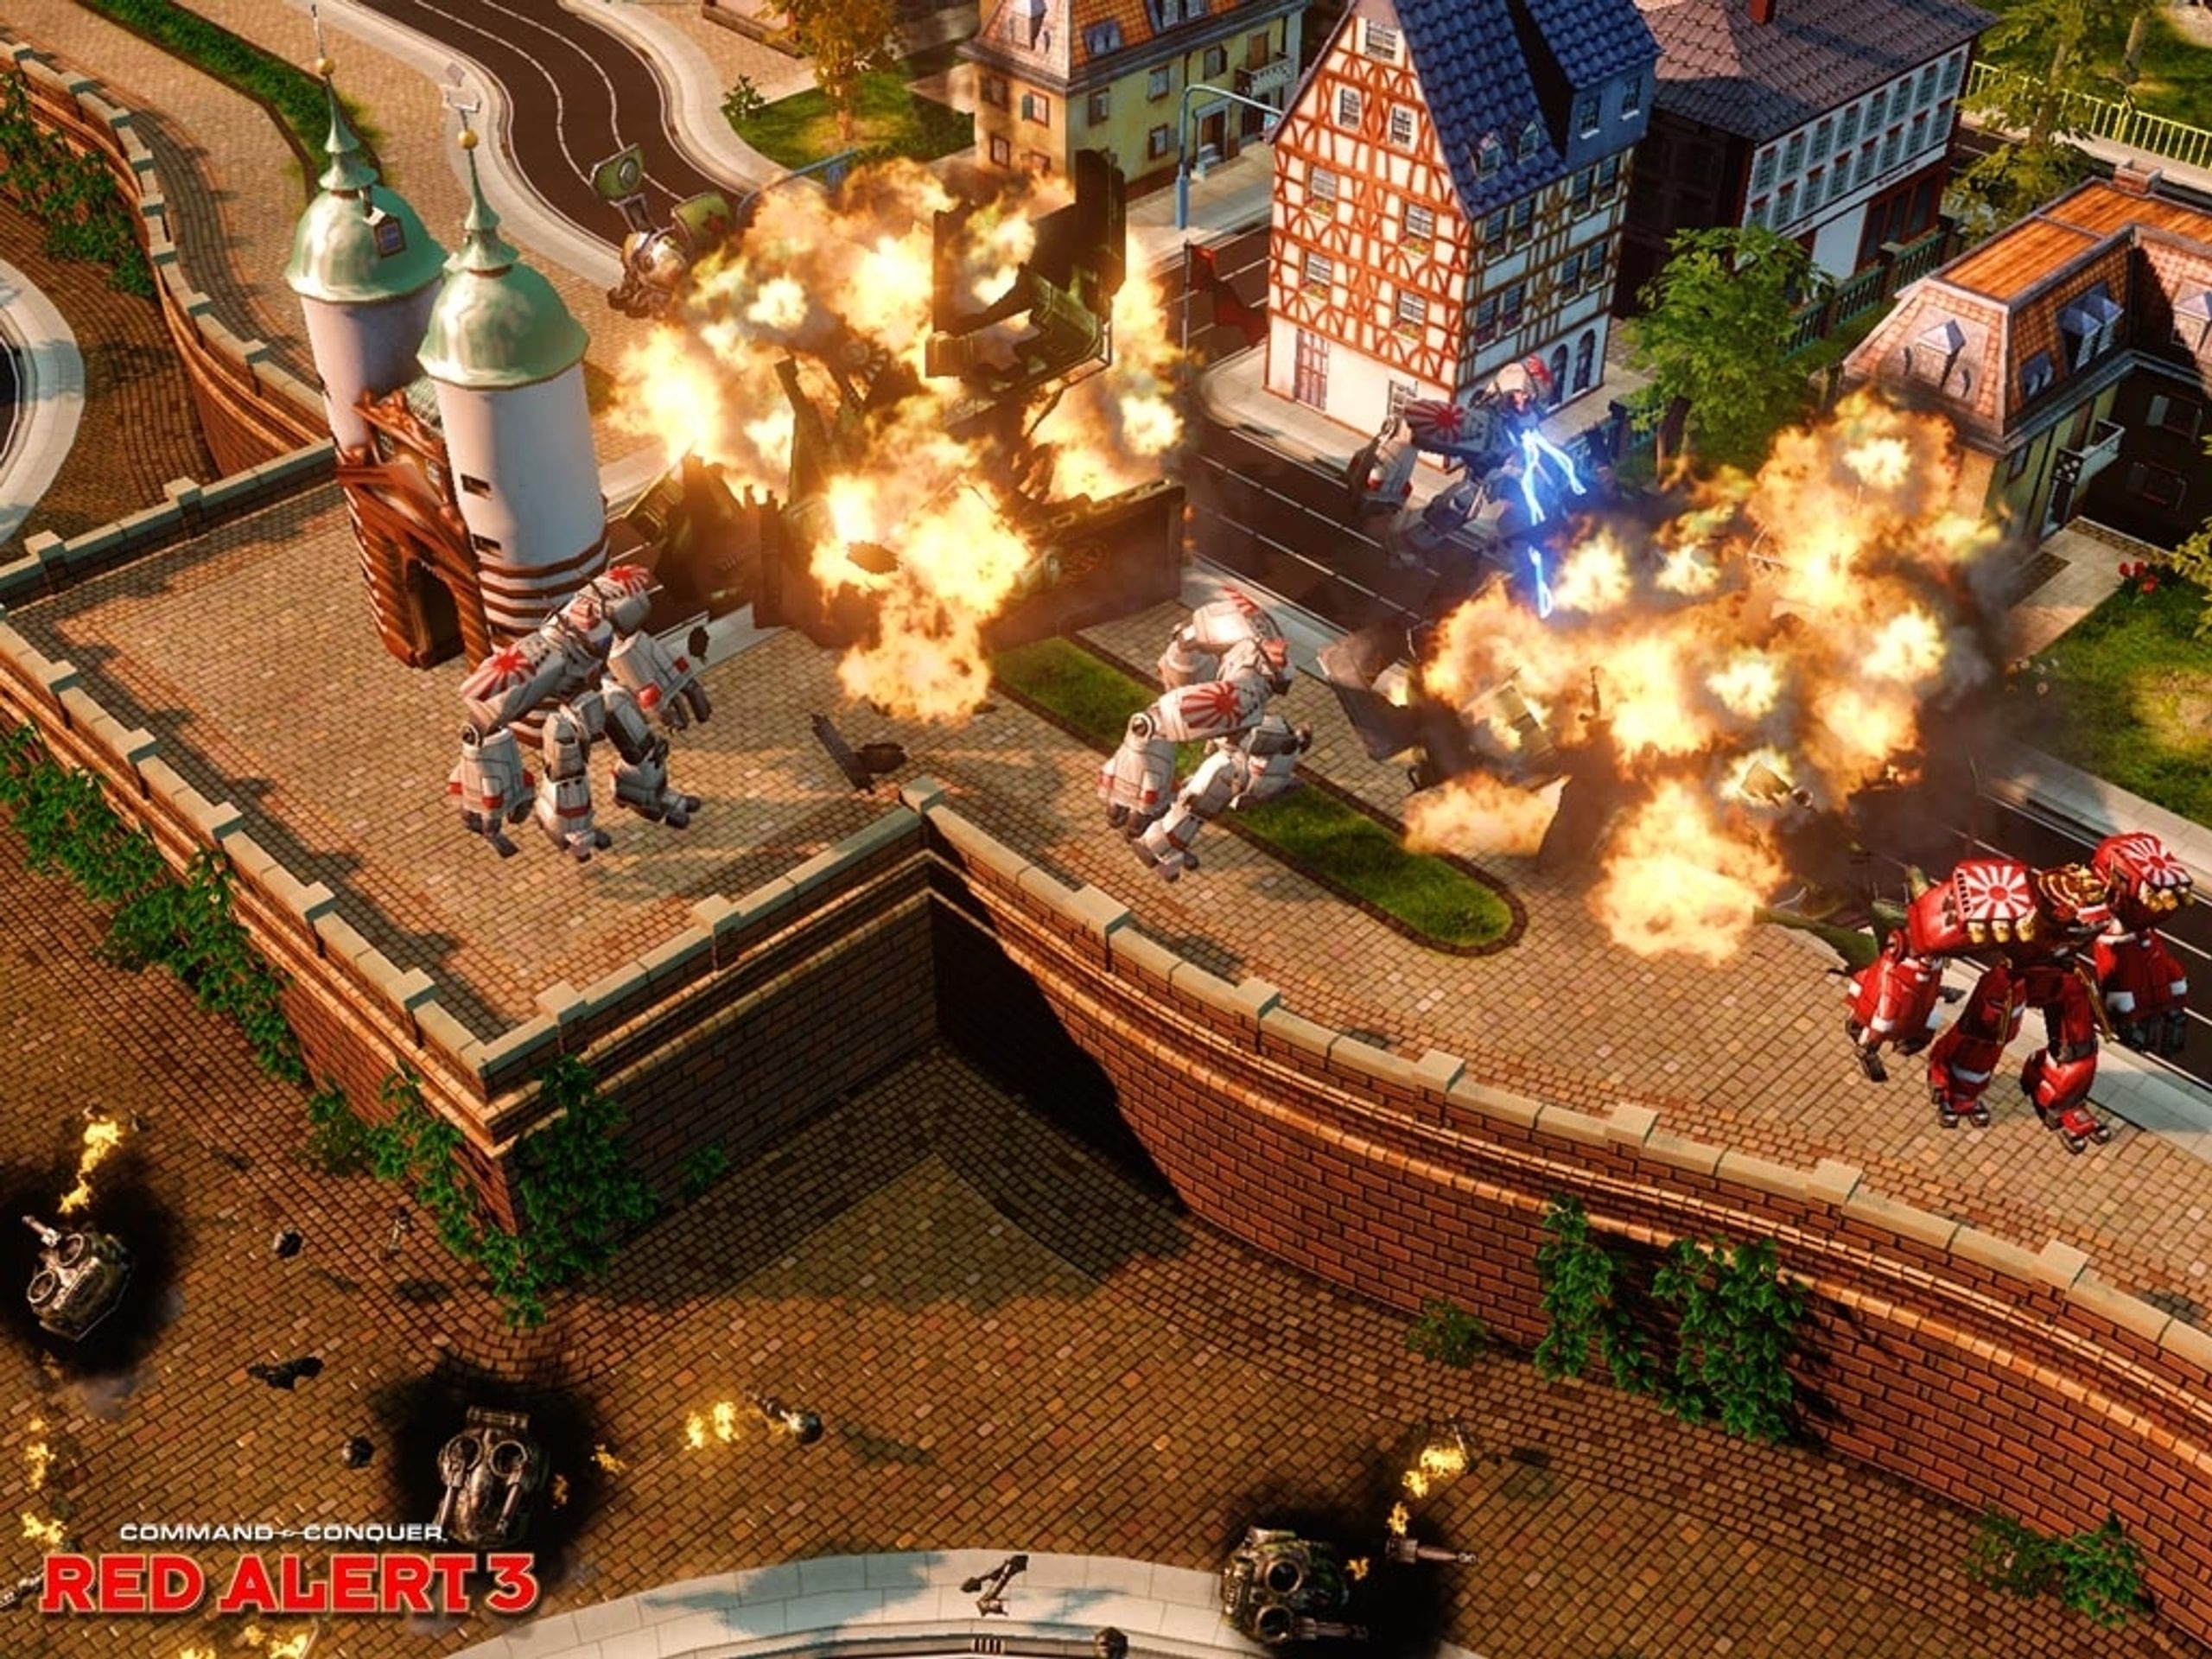 Command & Conquer: Red Alert 3 - Red Alert 3 galerie (3/16)